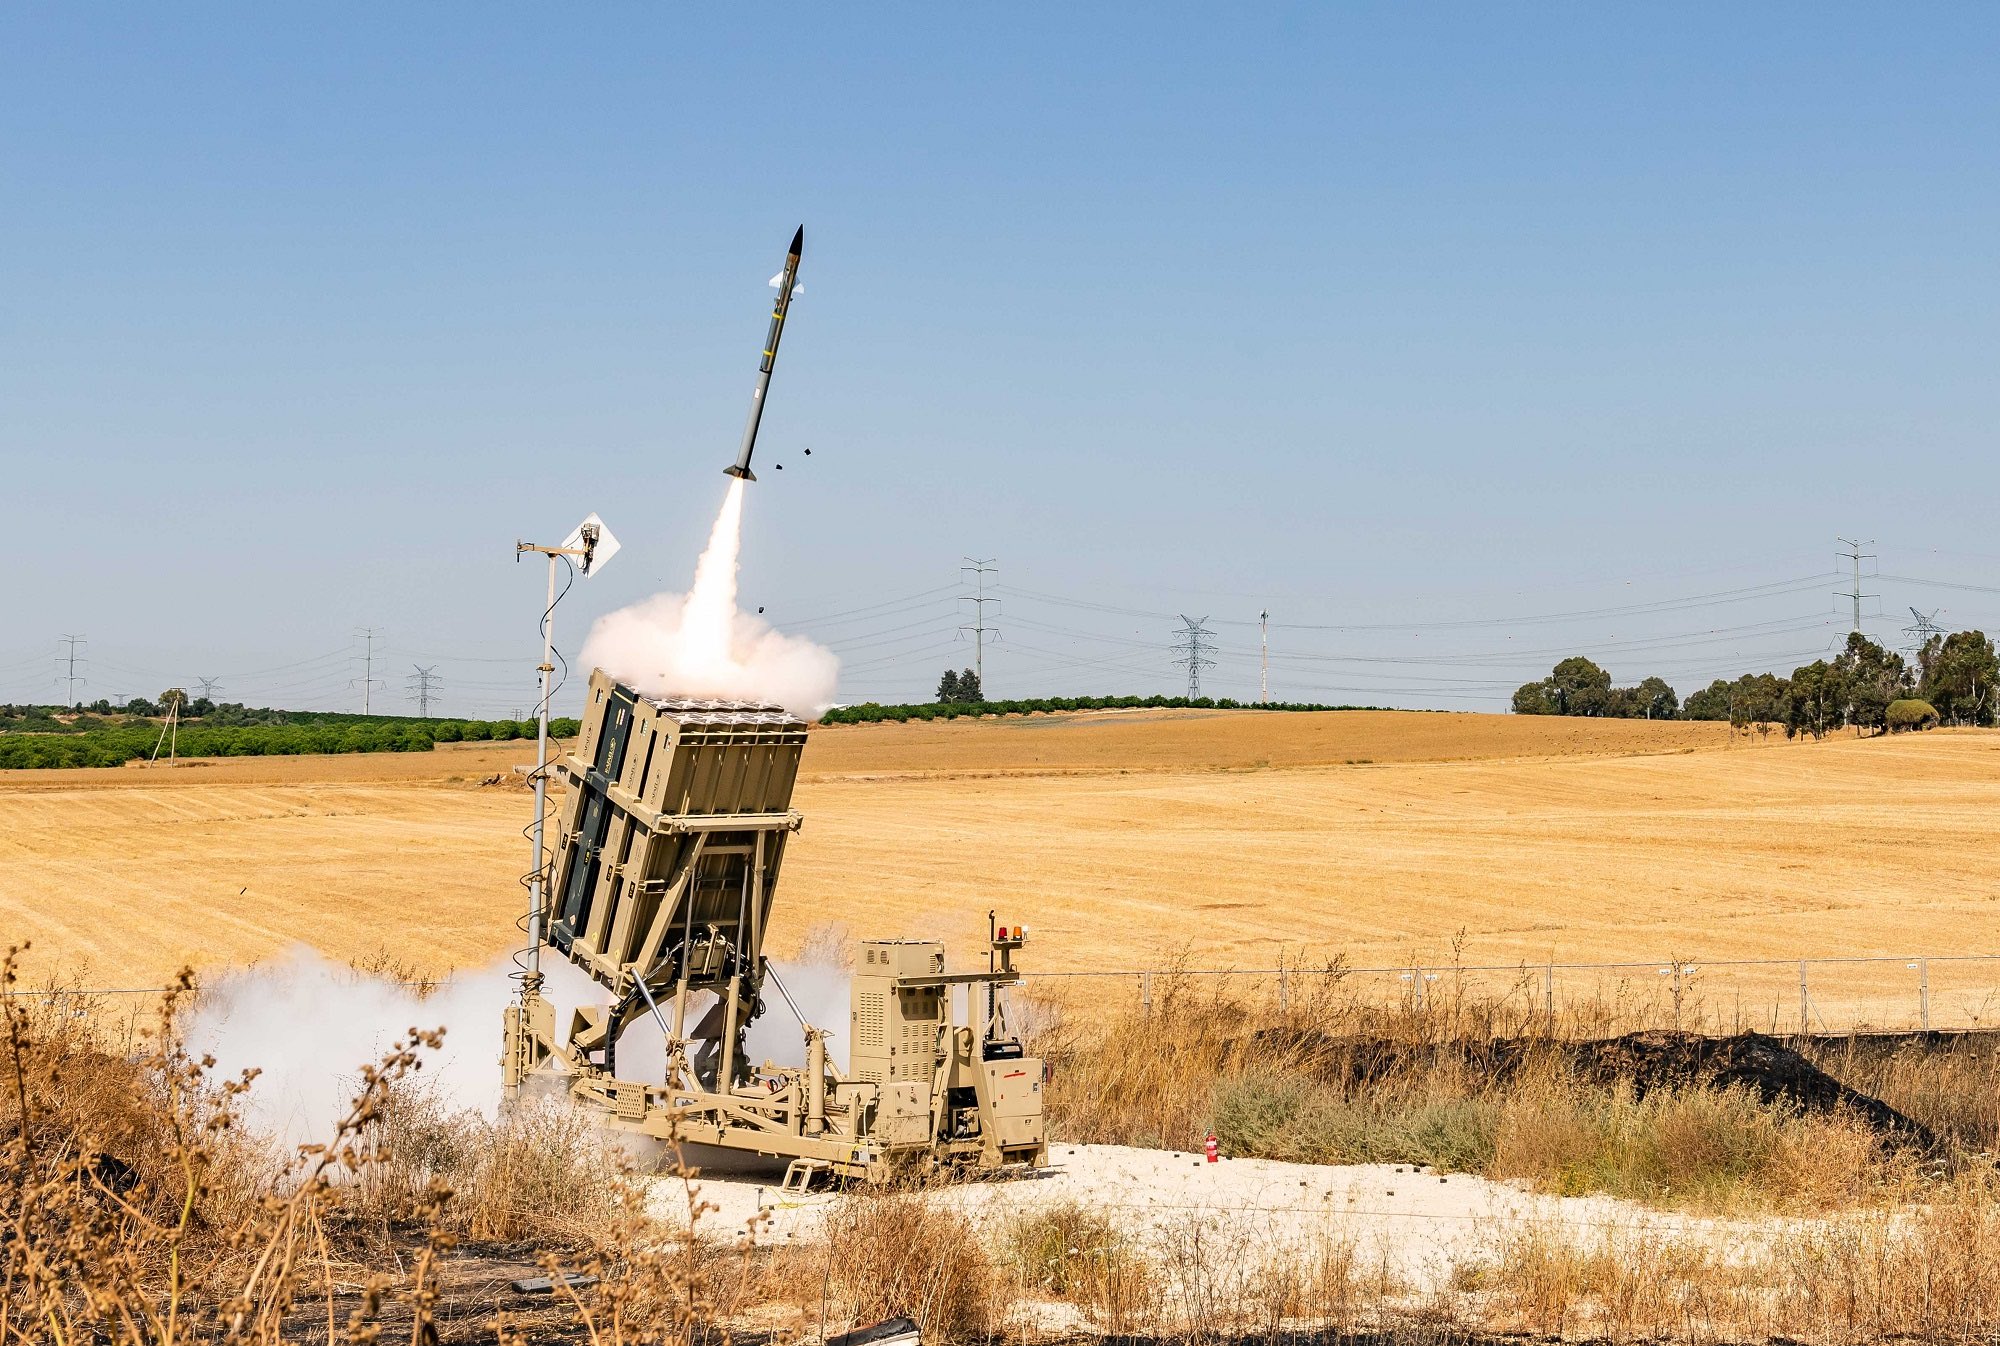 U.S. Army To Give Its Only Two Iron Dome Batteries To Israel: Reports